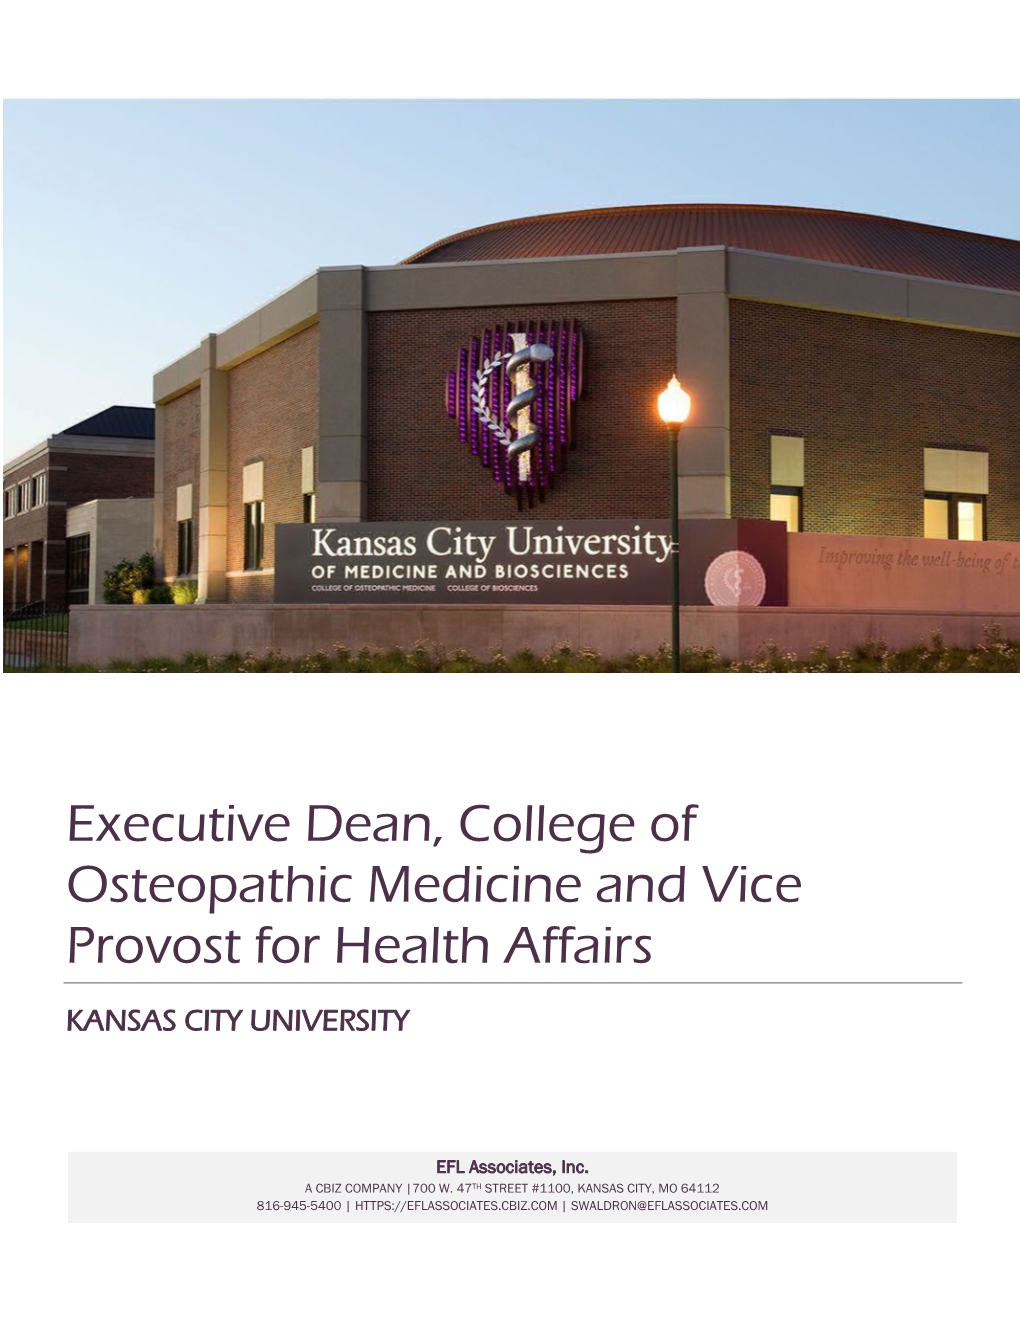 Executive Dean, College of Osteopathic Medicine and Vice Provost for Health Affairs